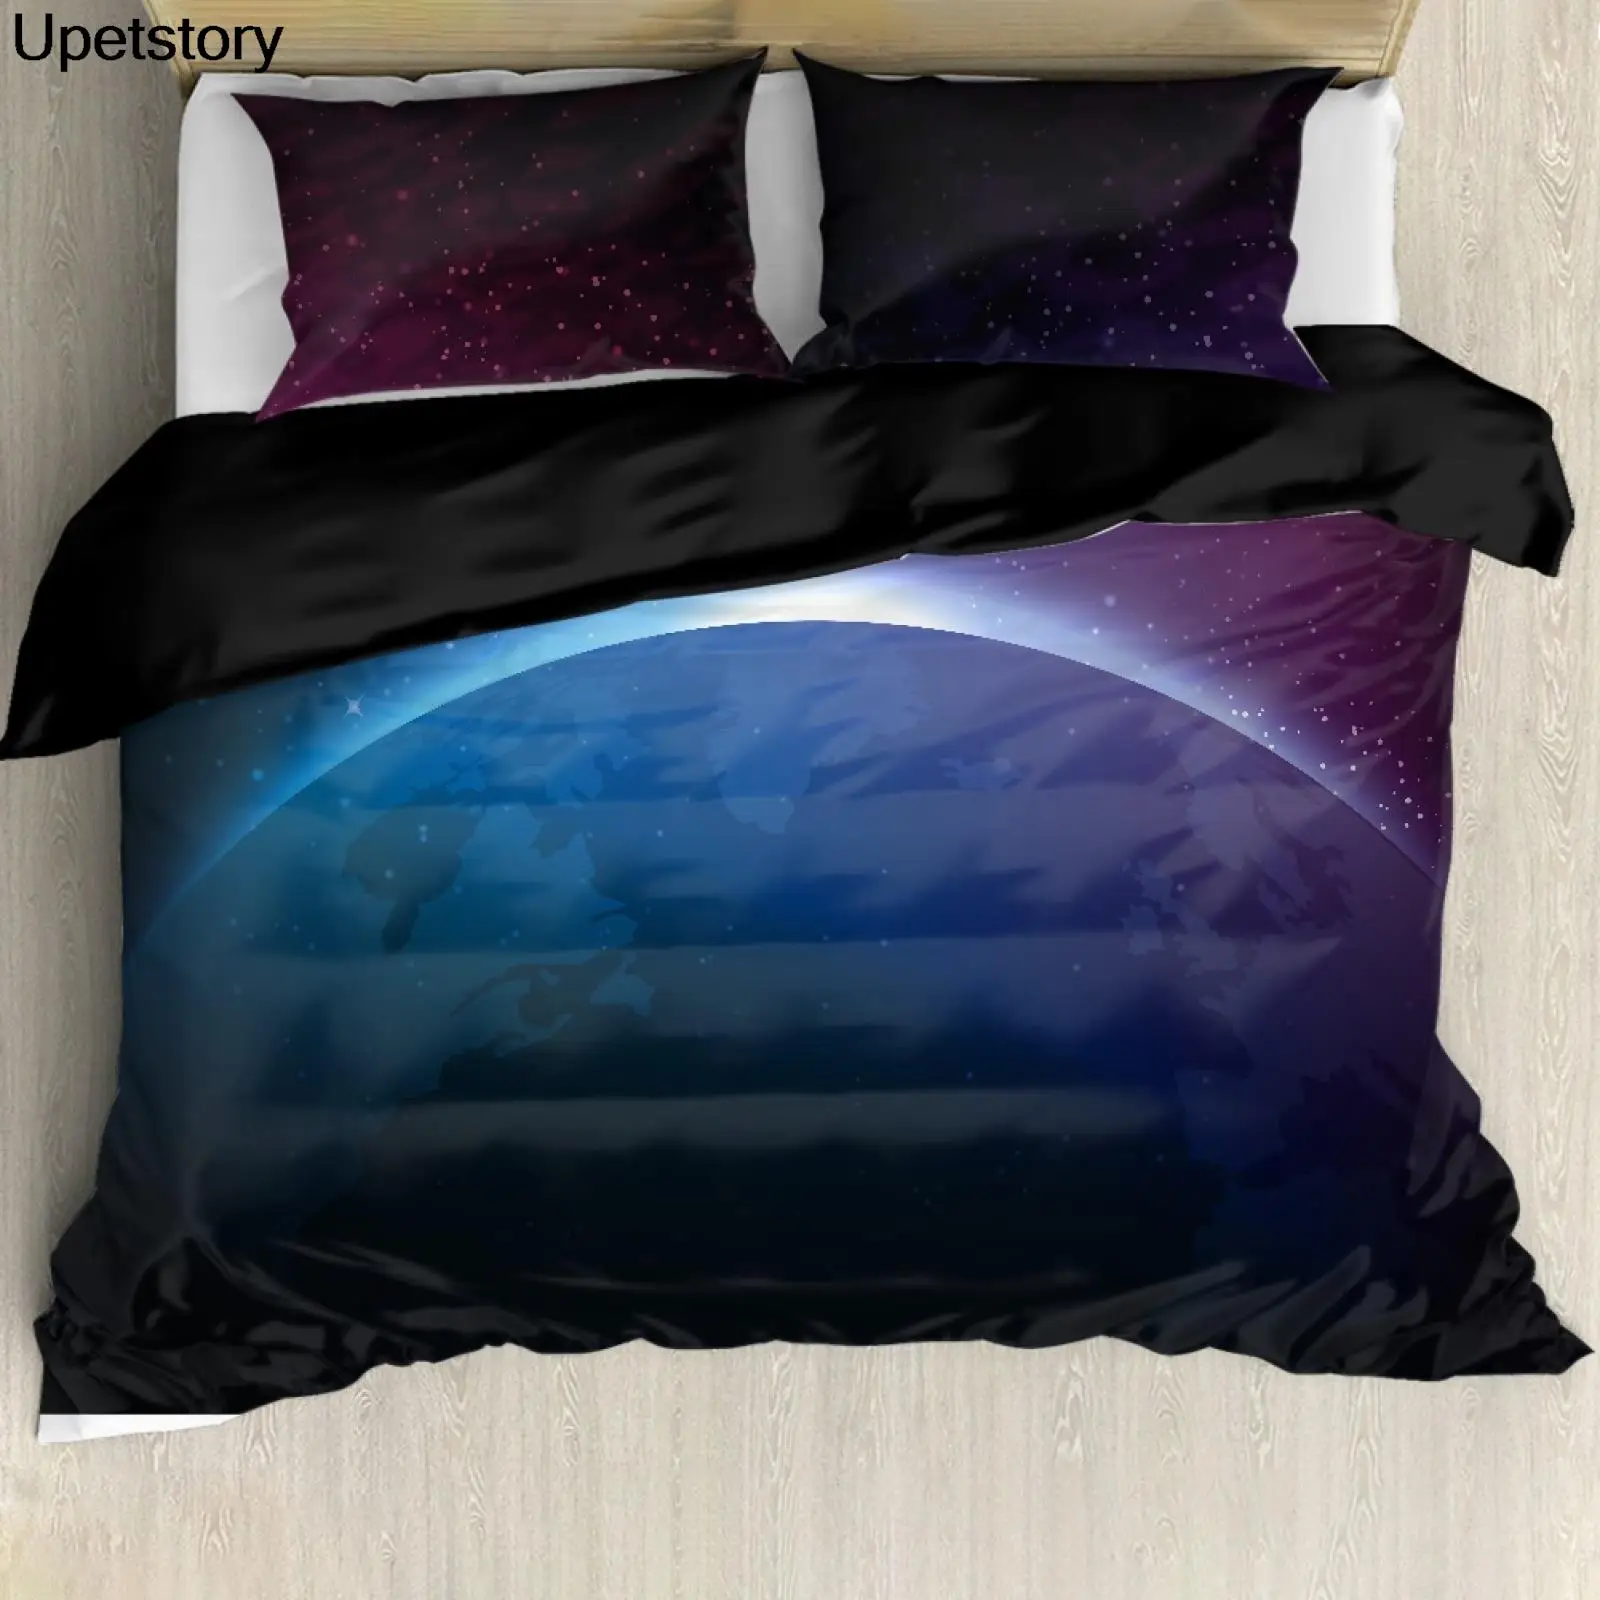 

Upetstory 3D Galaxy Duvet Cover Set Single Double Twin Queen 3pcs Bedding Sets Universe Outer Space Themed Bed Bedclothes